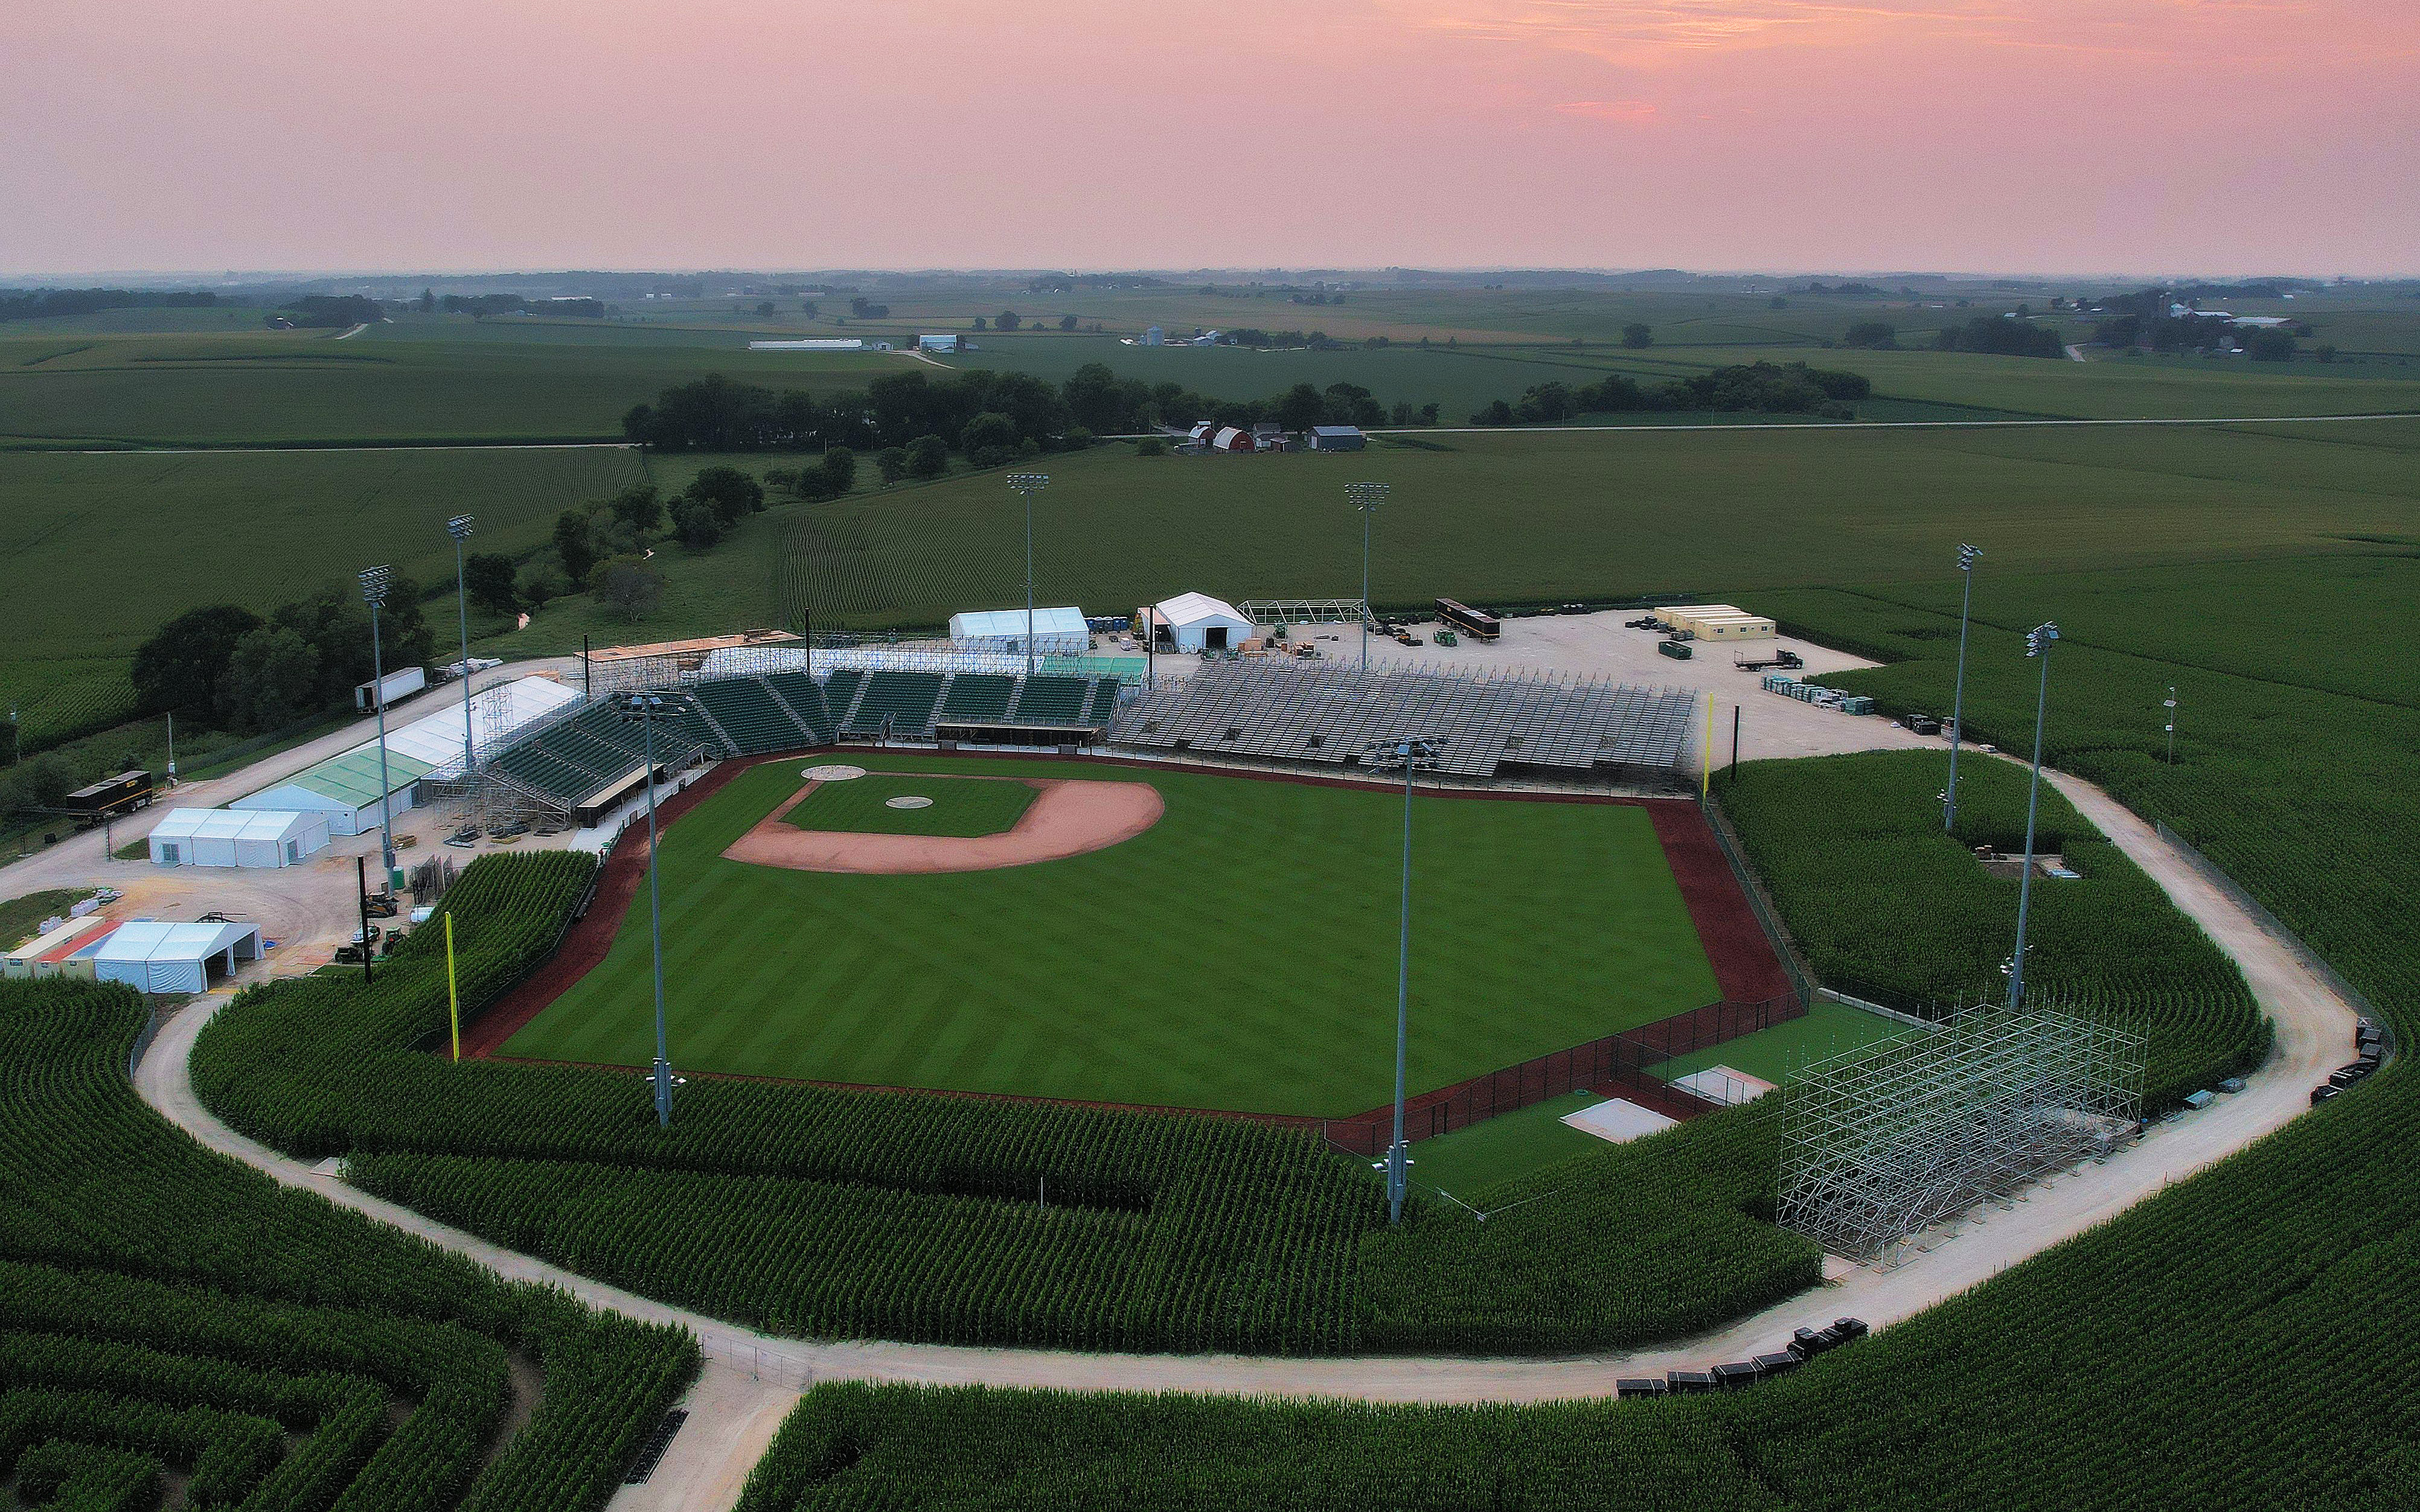 After two years of waiting, the MLB's “Field of Dreams” is here